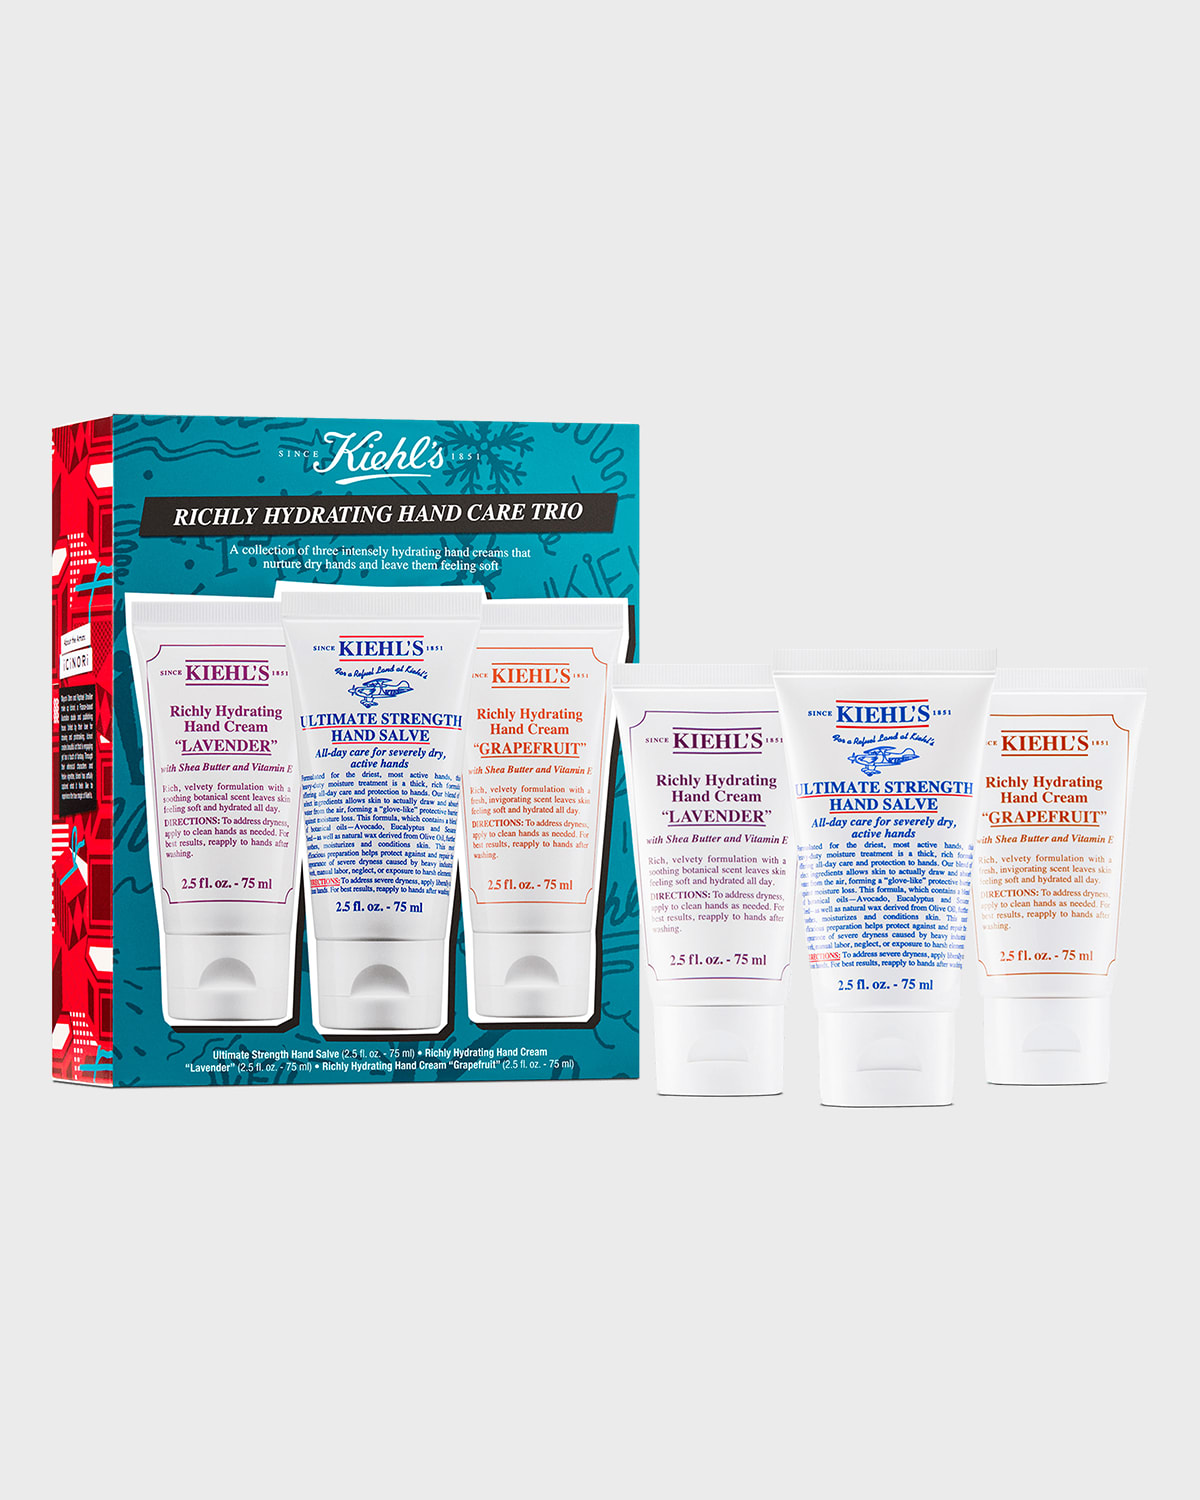 Richly Hydrating Hand Care Trio ($58 Value)